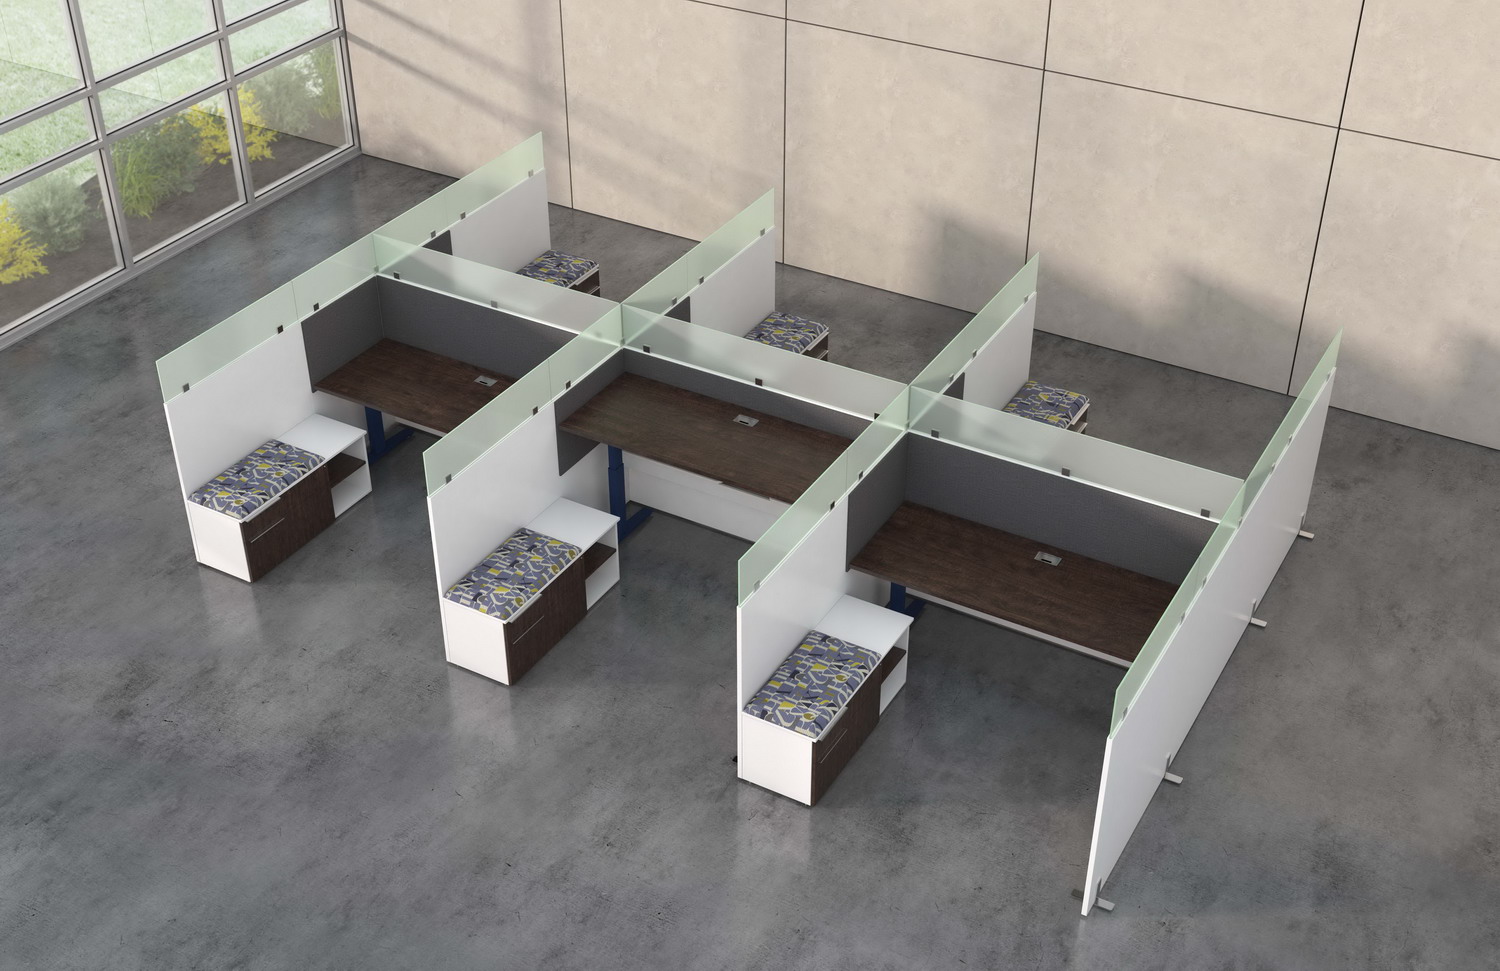 Aerial contract furniture rendering of the Hover benching 6 plex with frosted glass dividers.